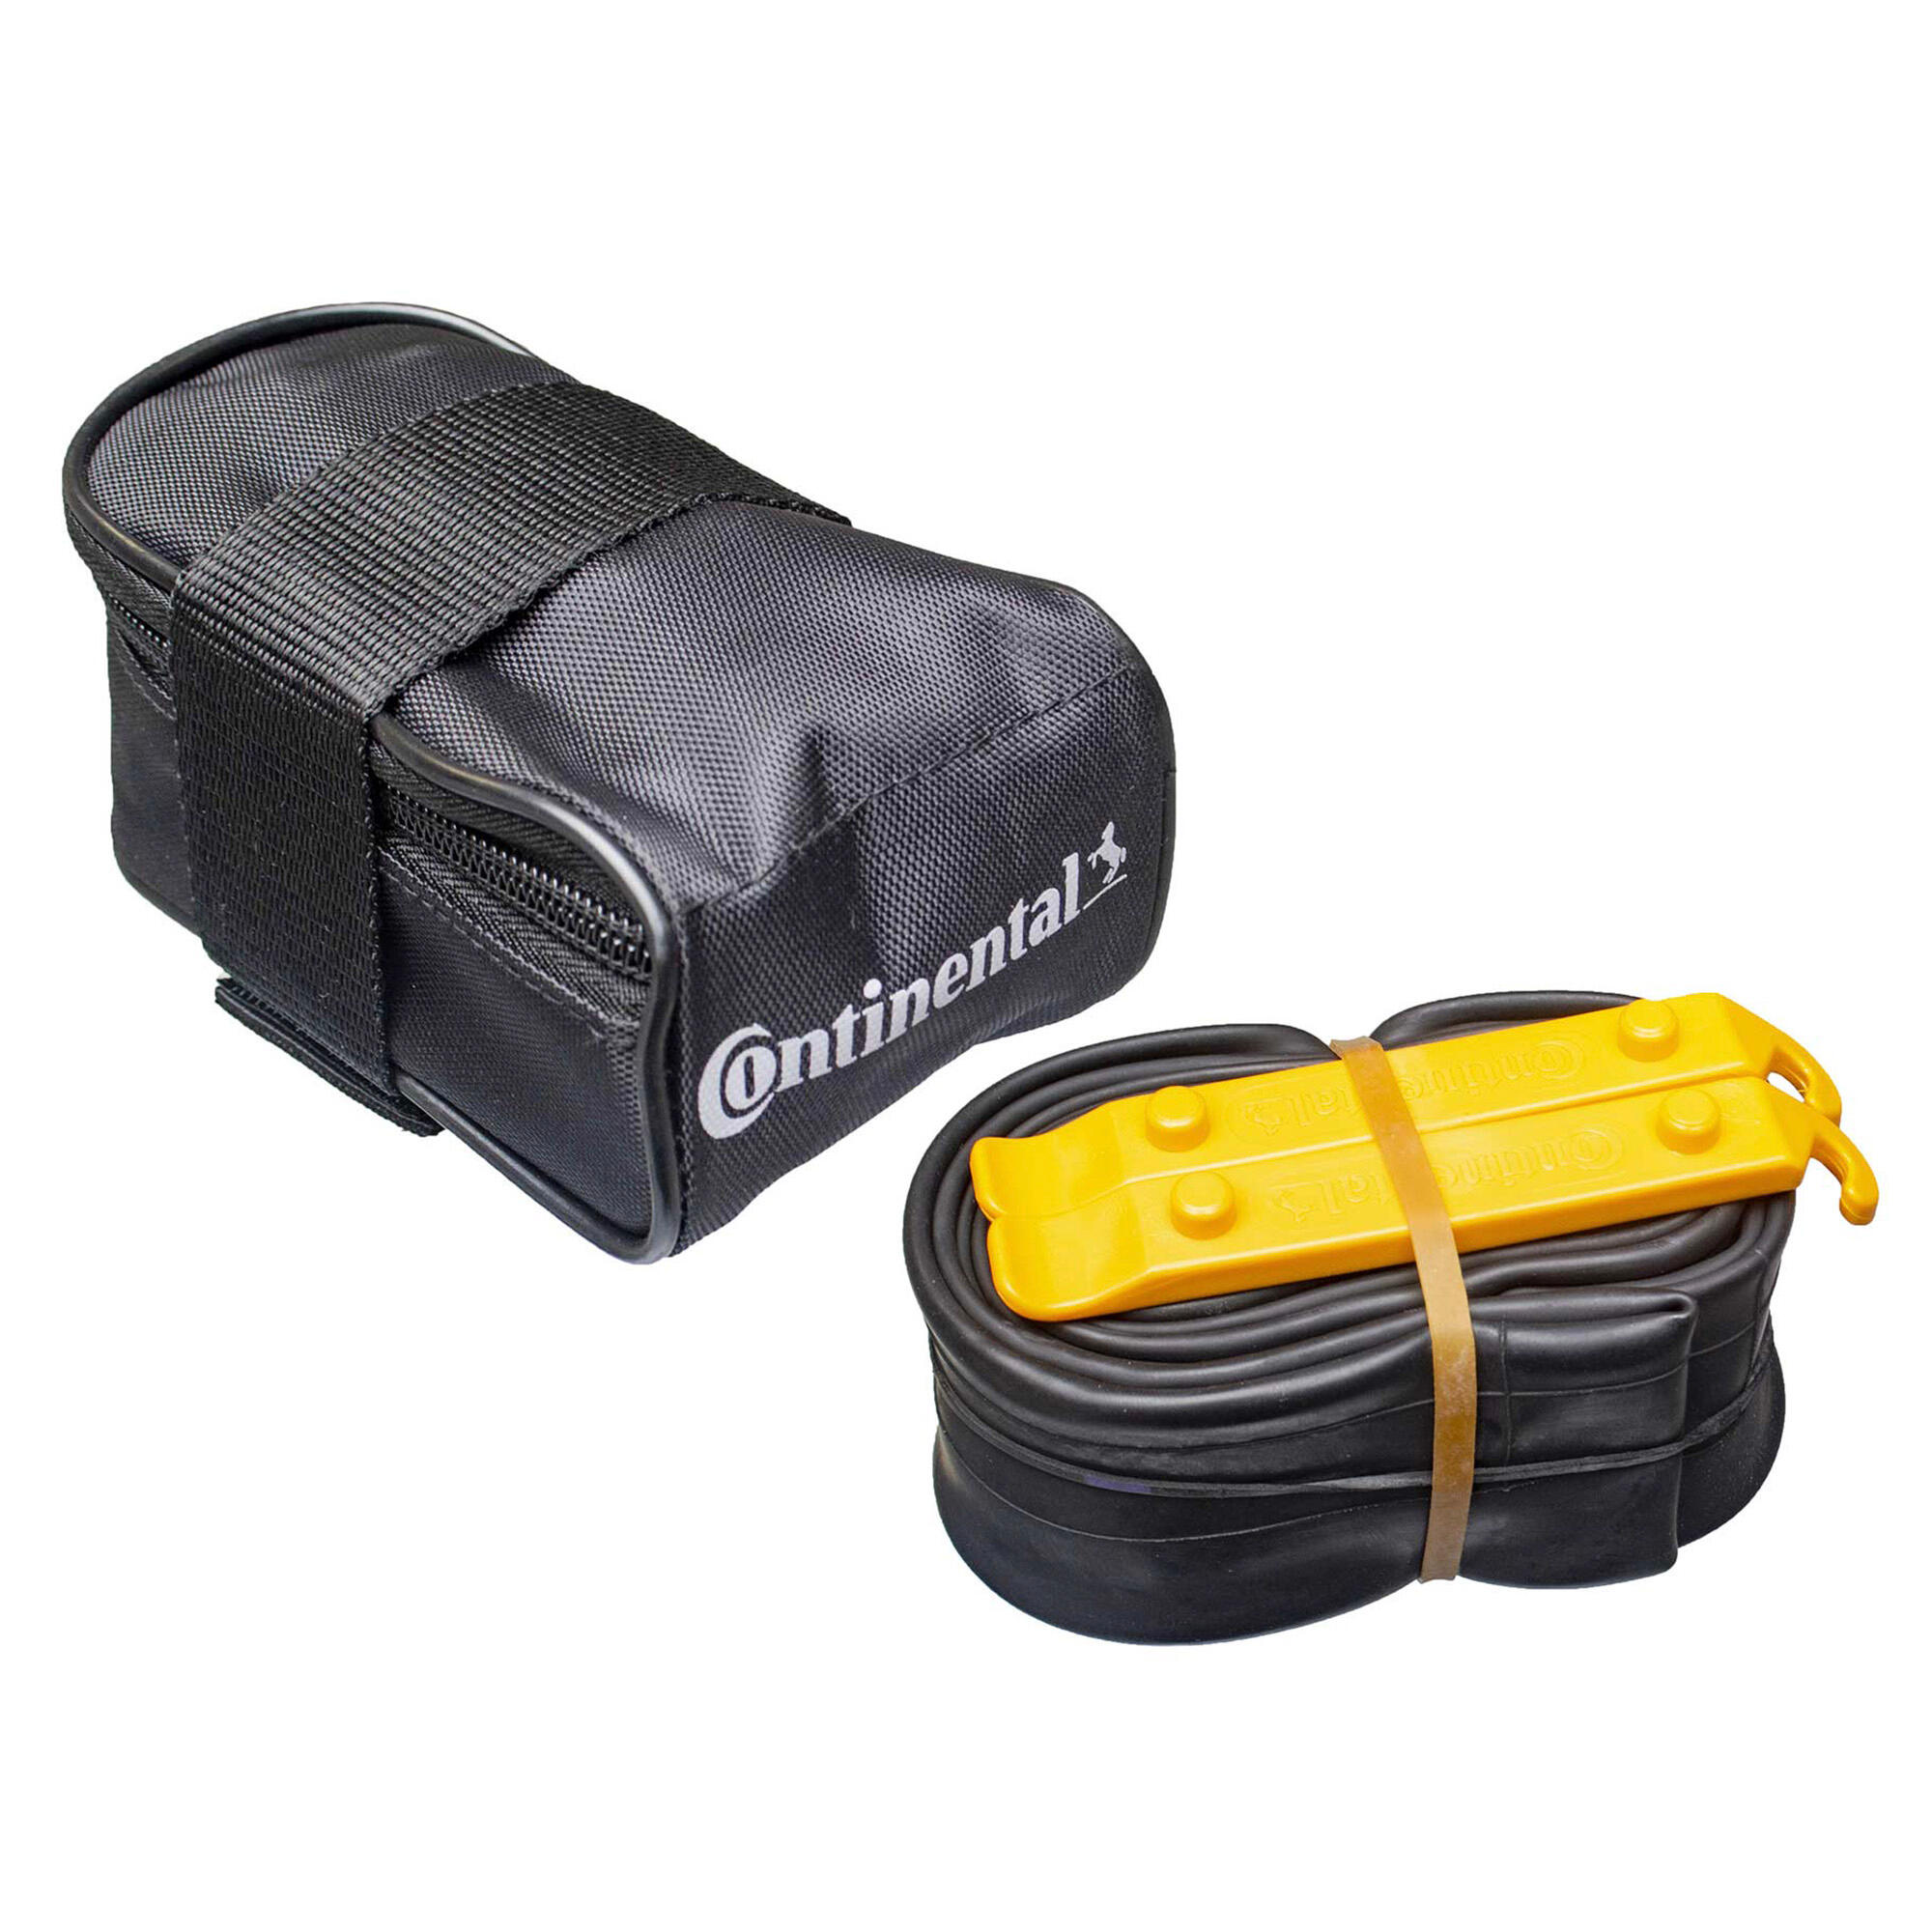 CONTINENTAL MTB Saddle Bag with MTB 29 x 1.75x2.5 Presta 42mm Valve Tube and 2 Tyre Levers